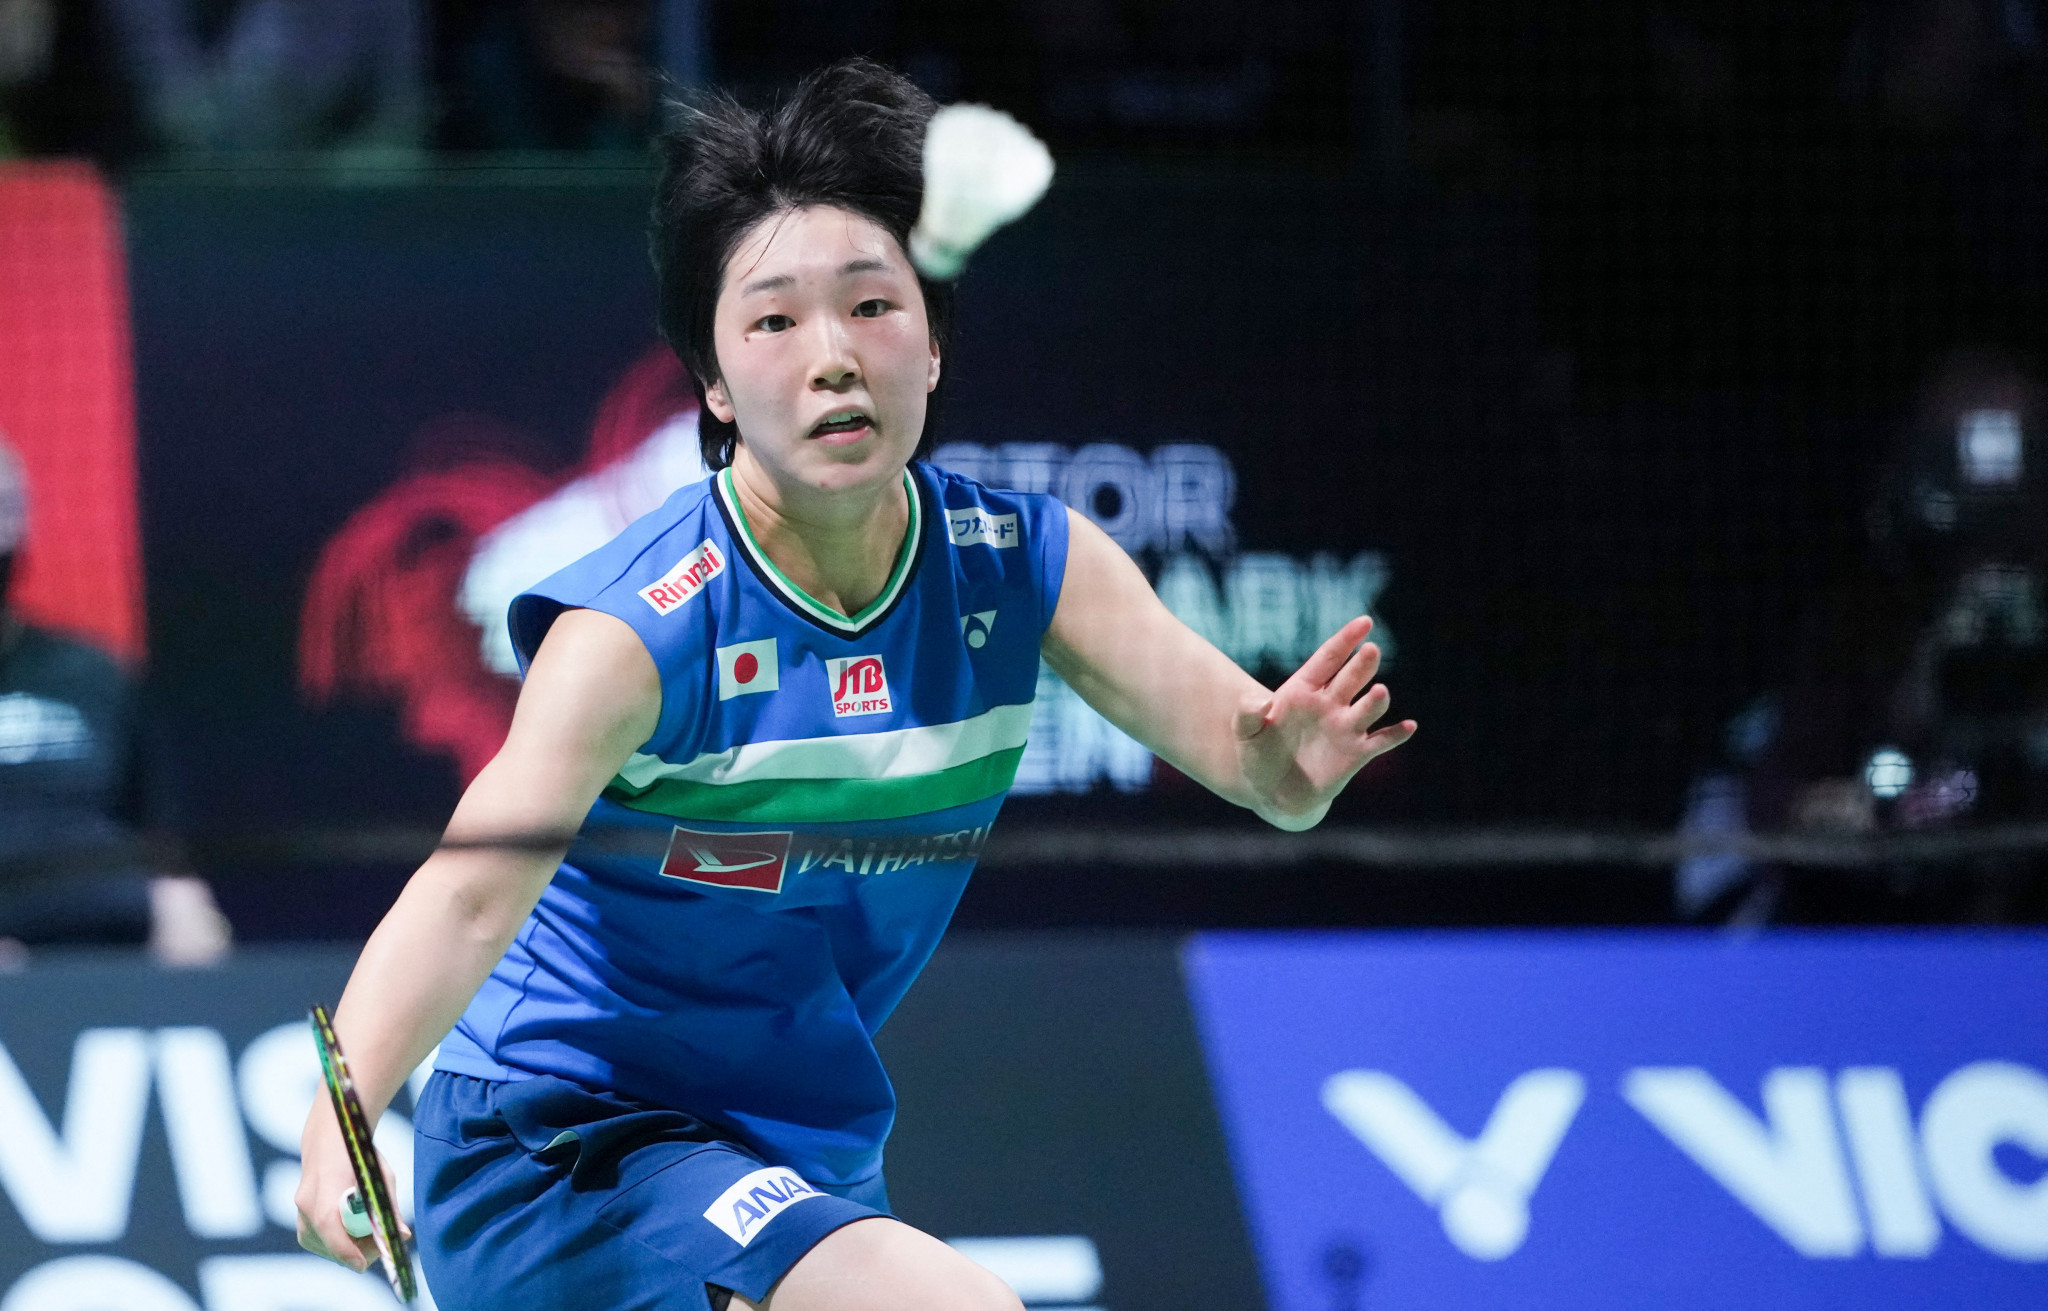 Top seeds emerge unscathed in opening round of BWF Indonesia Masters